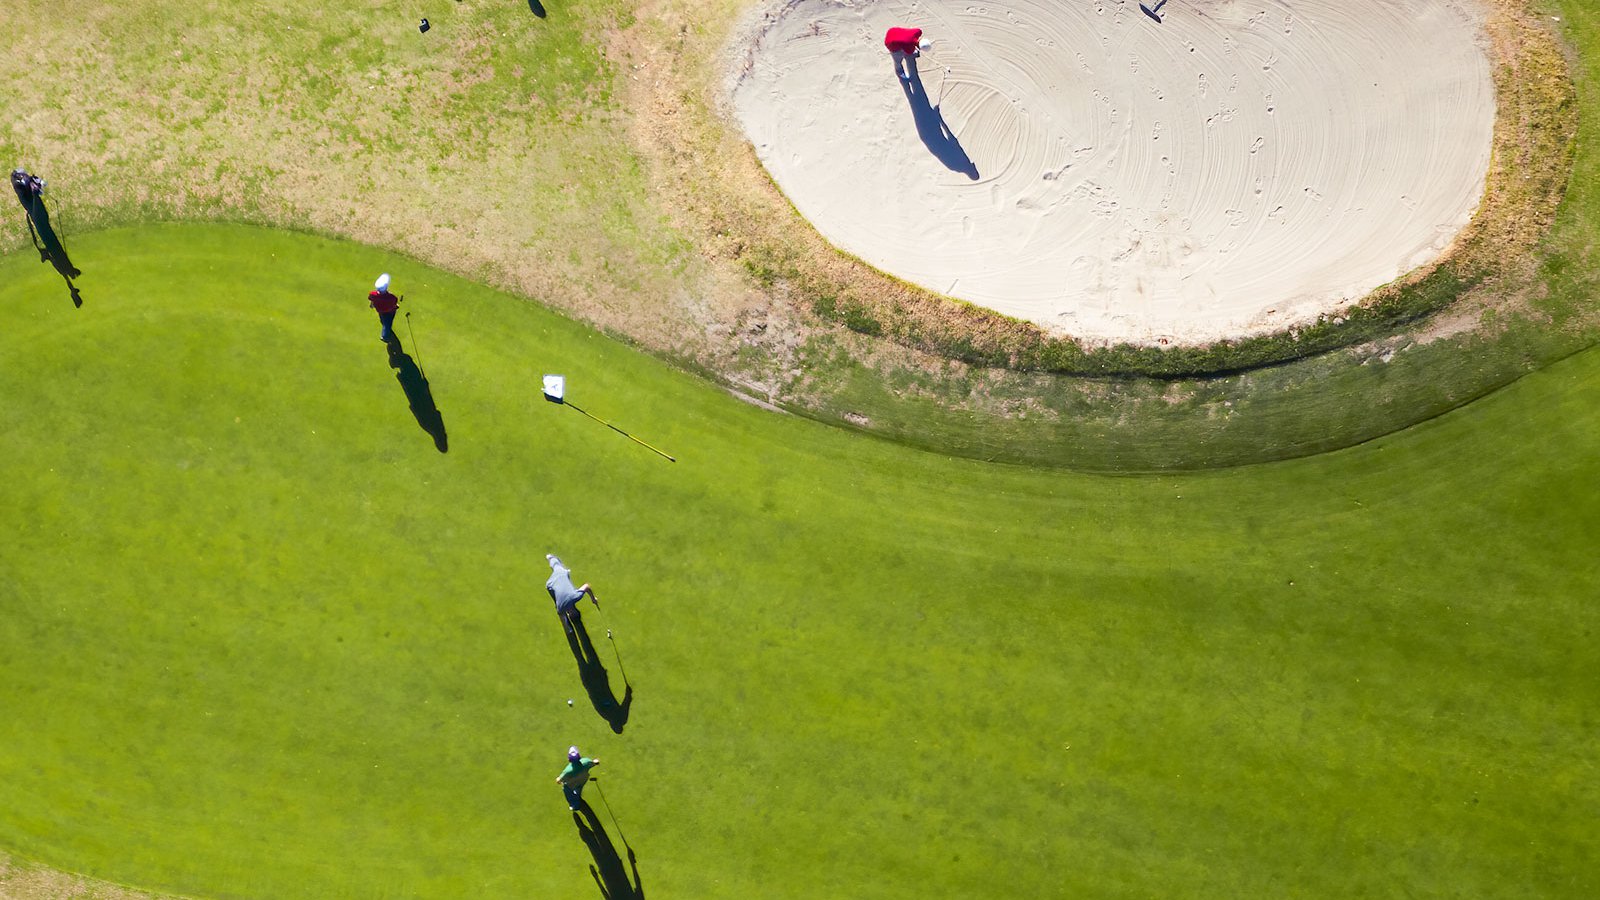 Blog photography of golfers enjoying the warm weather on Christmas Day in Los Angeles, California